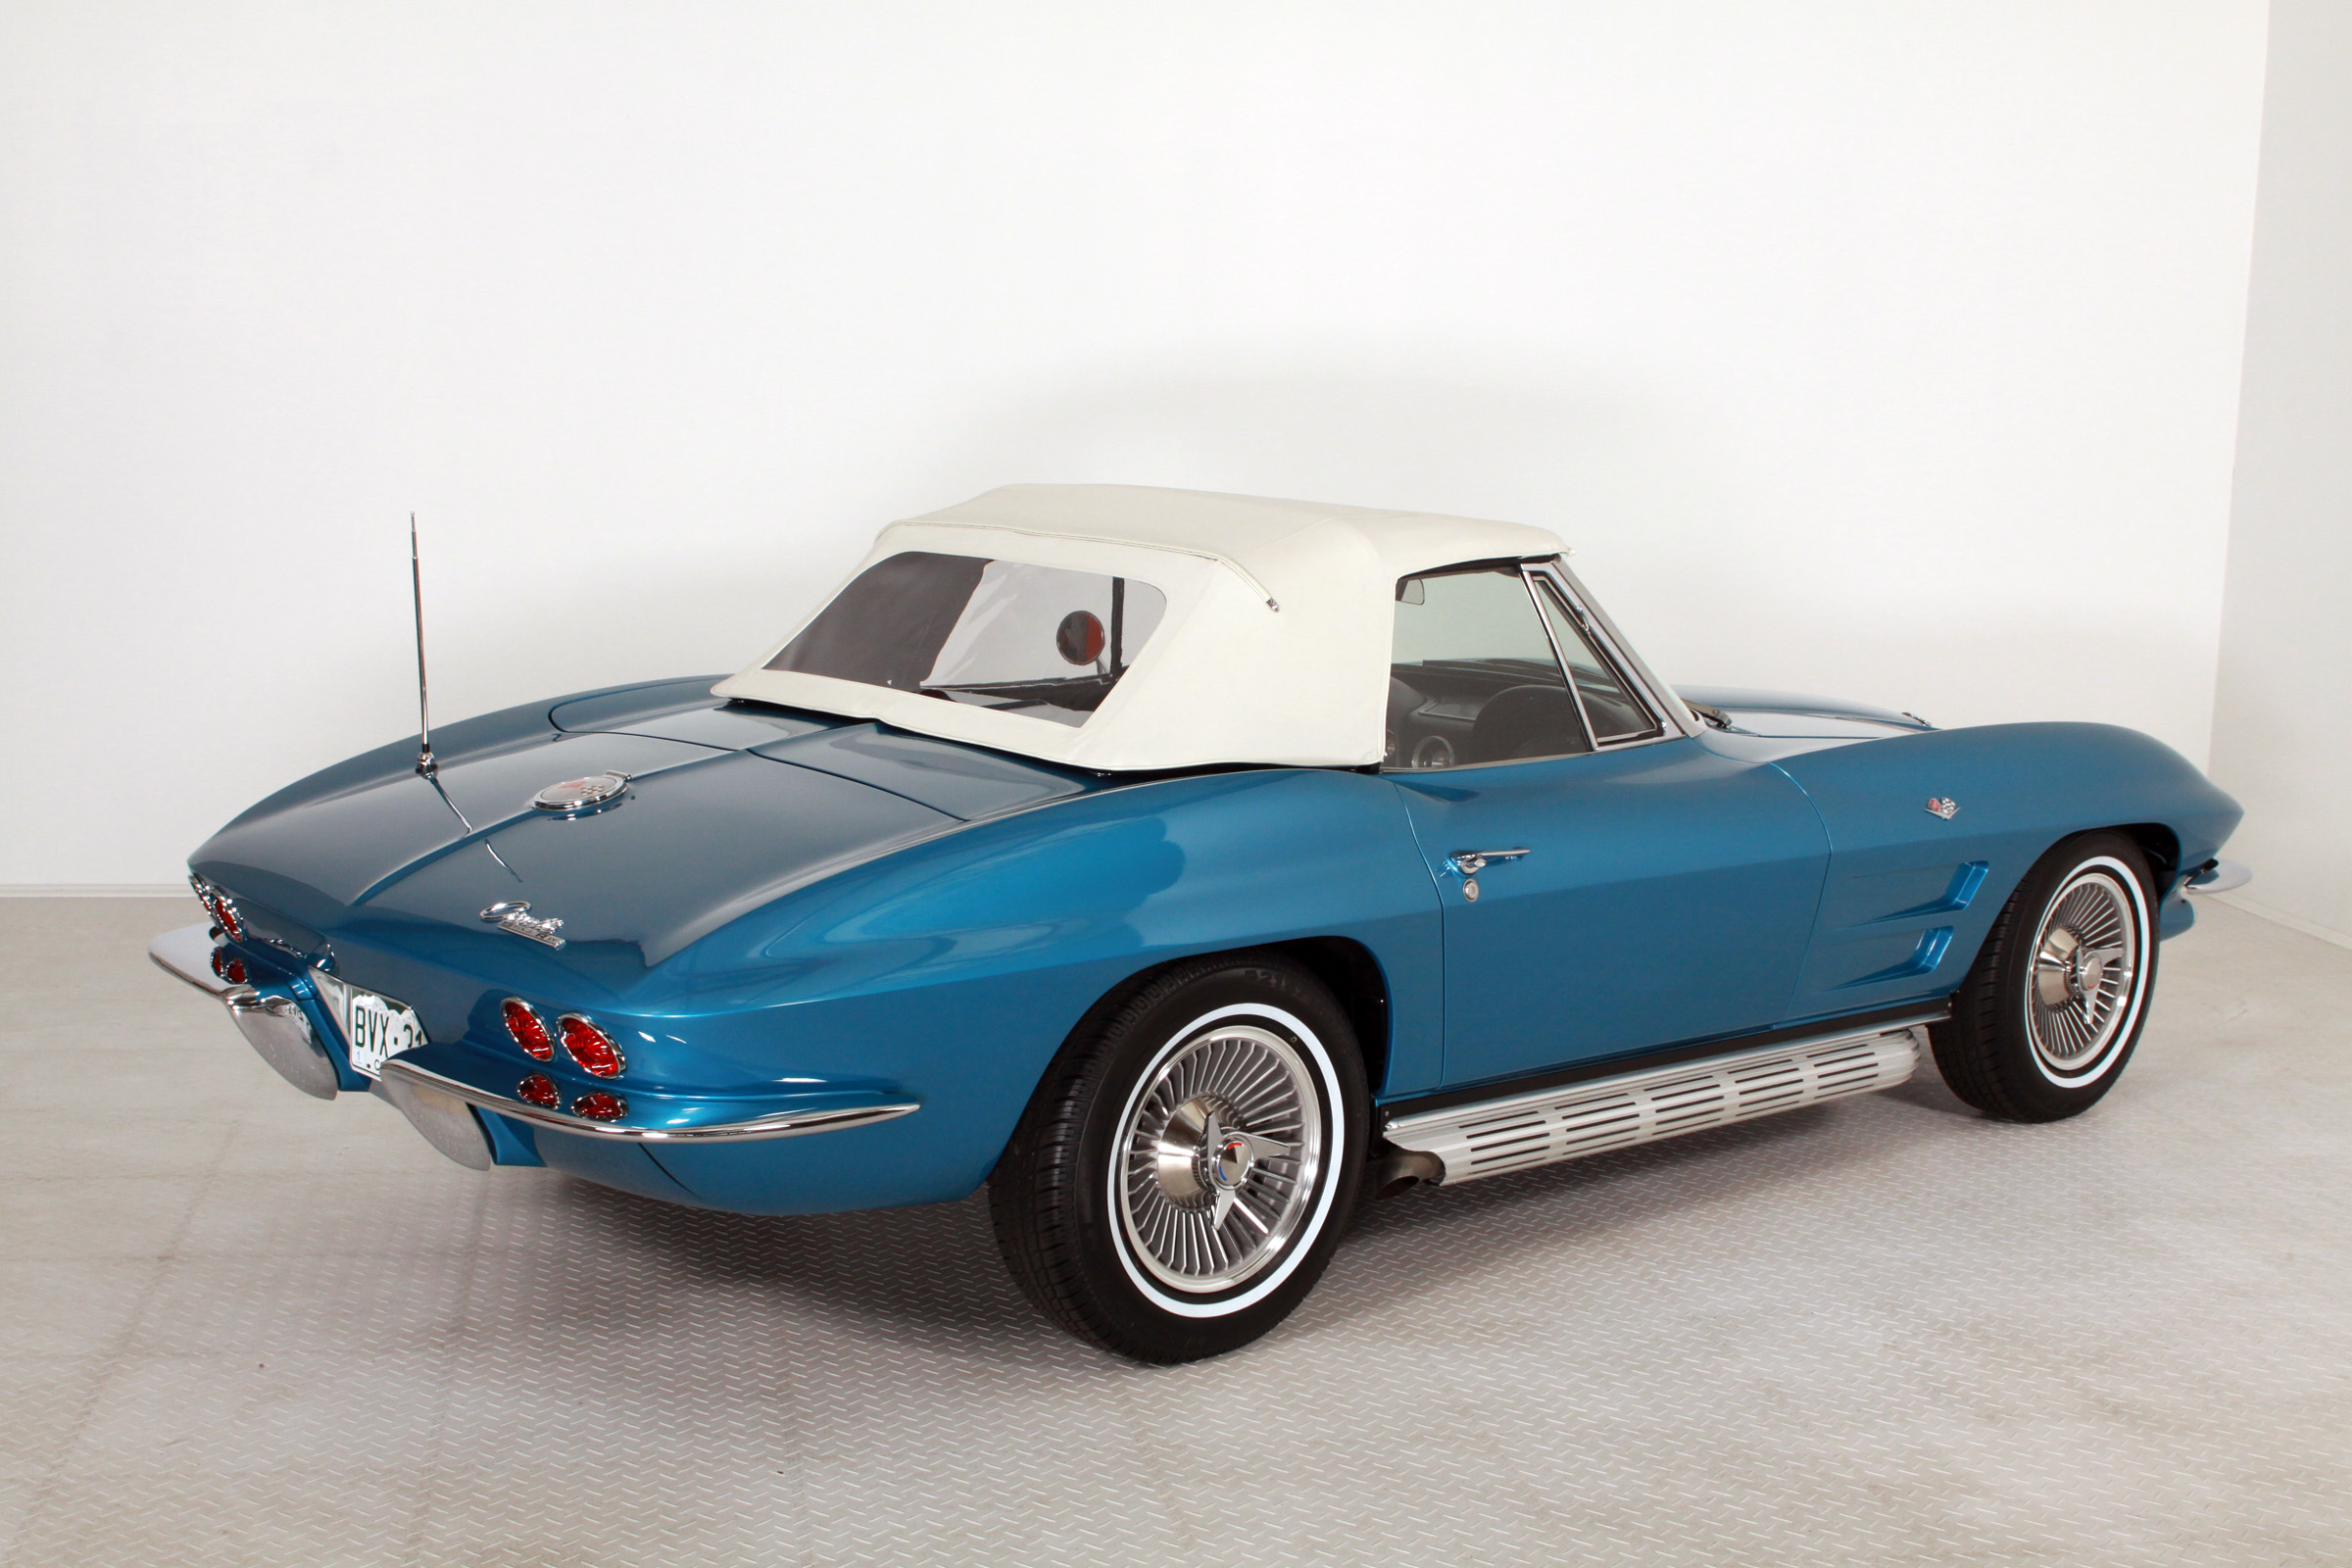 Chevrolet - Corvette C2 Sting Ray Convertible -Frame Off -Matching